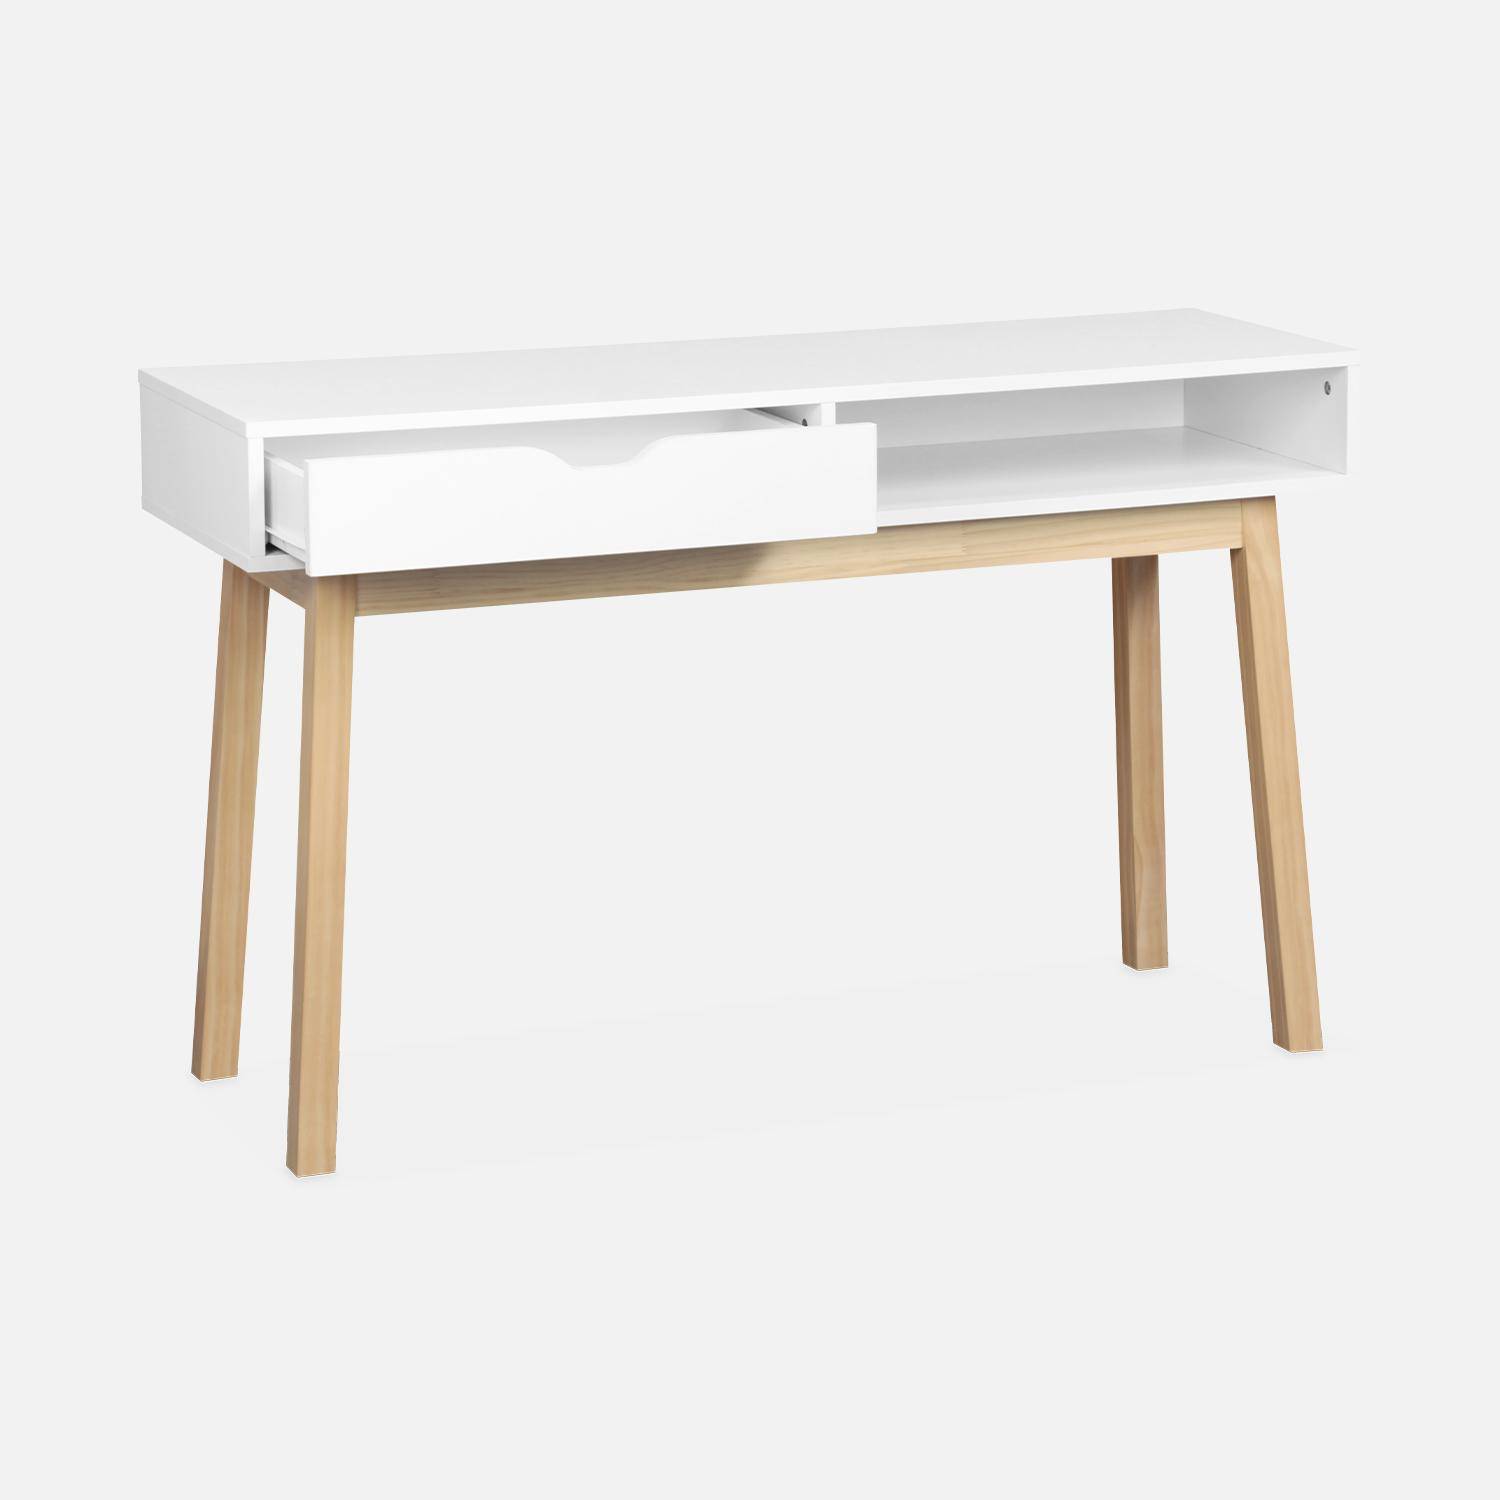 L119cm x W37cm x H74.5cm, Console with Wood Effect and Wooden Legs, 1 Drawer, white, ,sweeek,Photo5